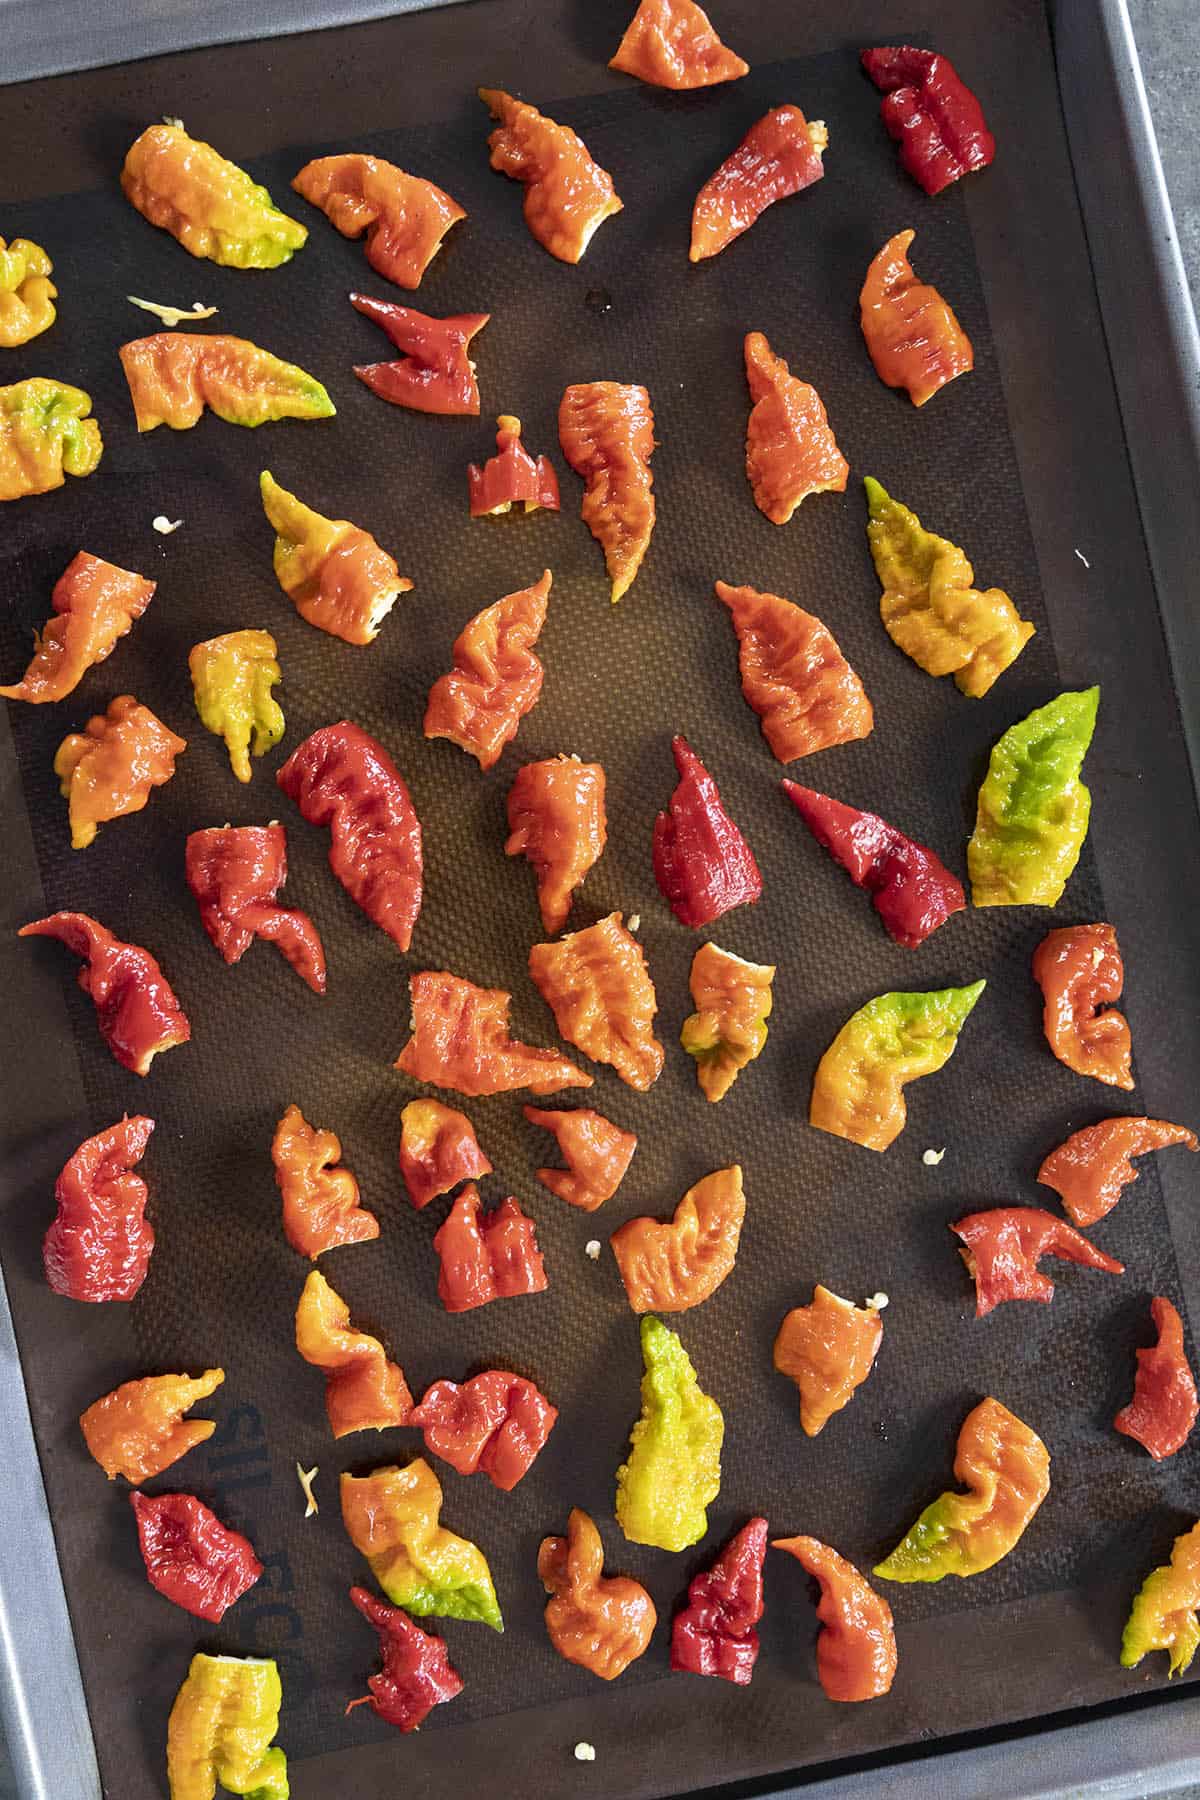 Superhot Hot chili peppers on a sheet, ready to roast